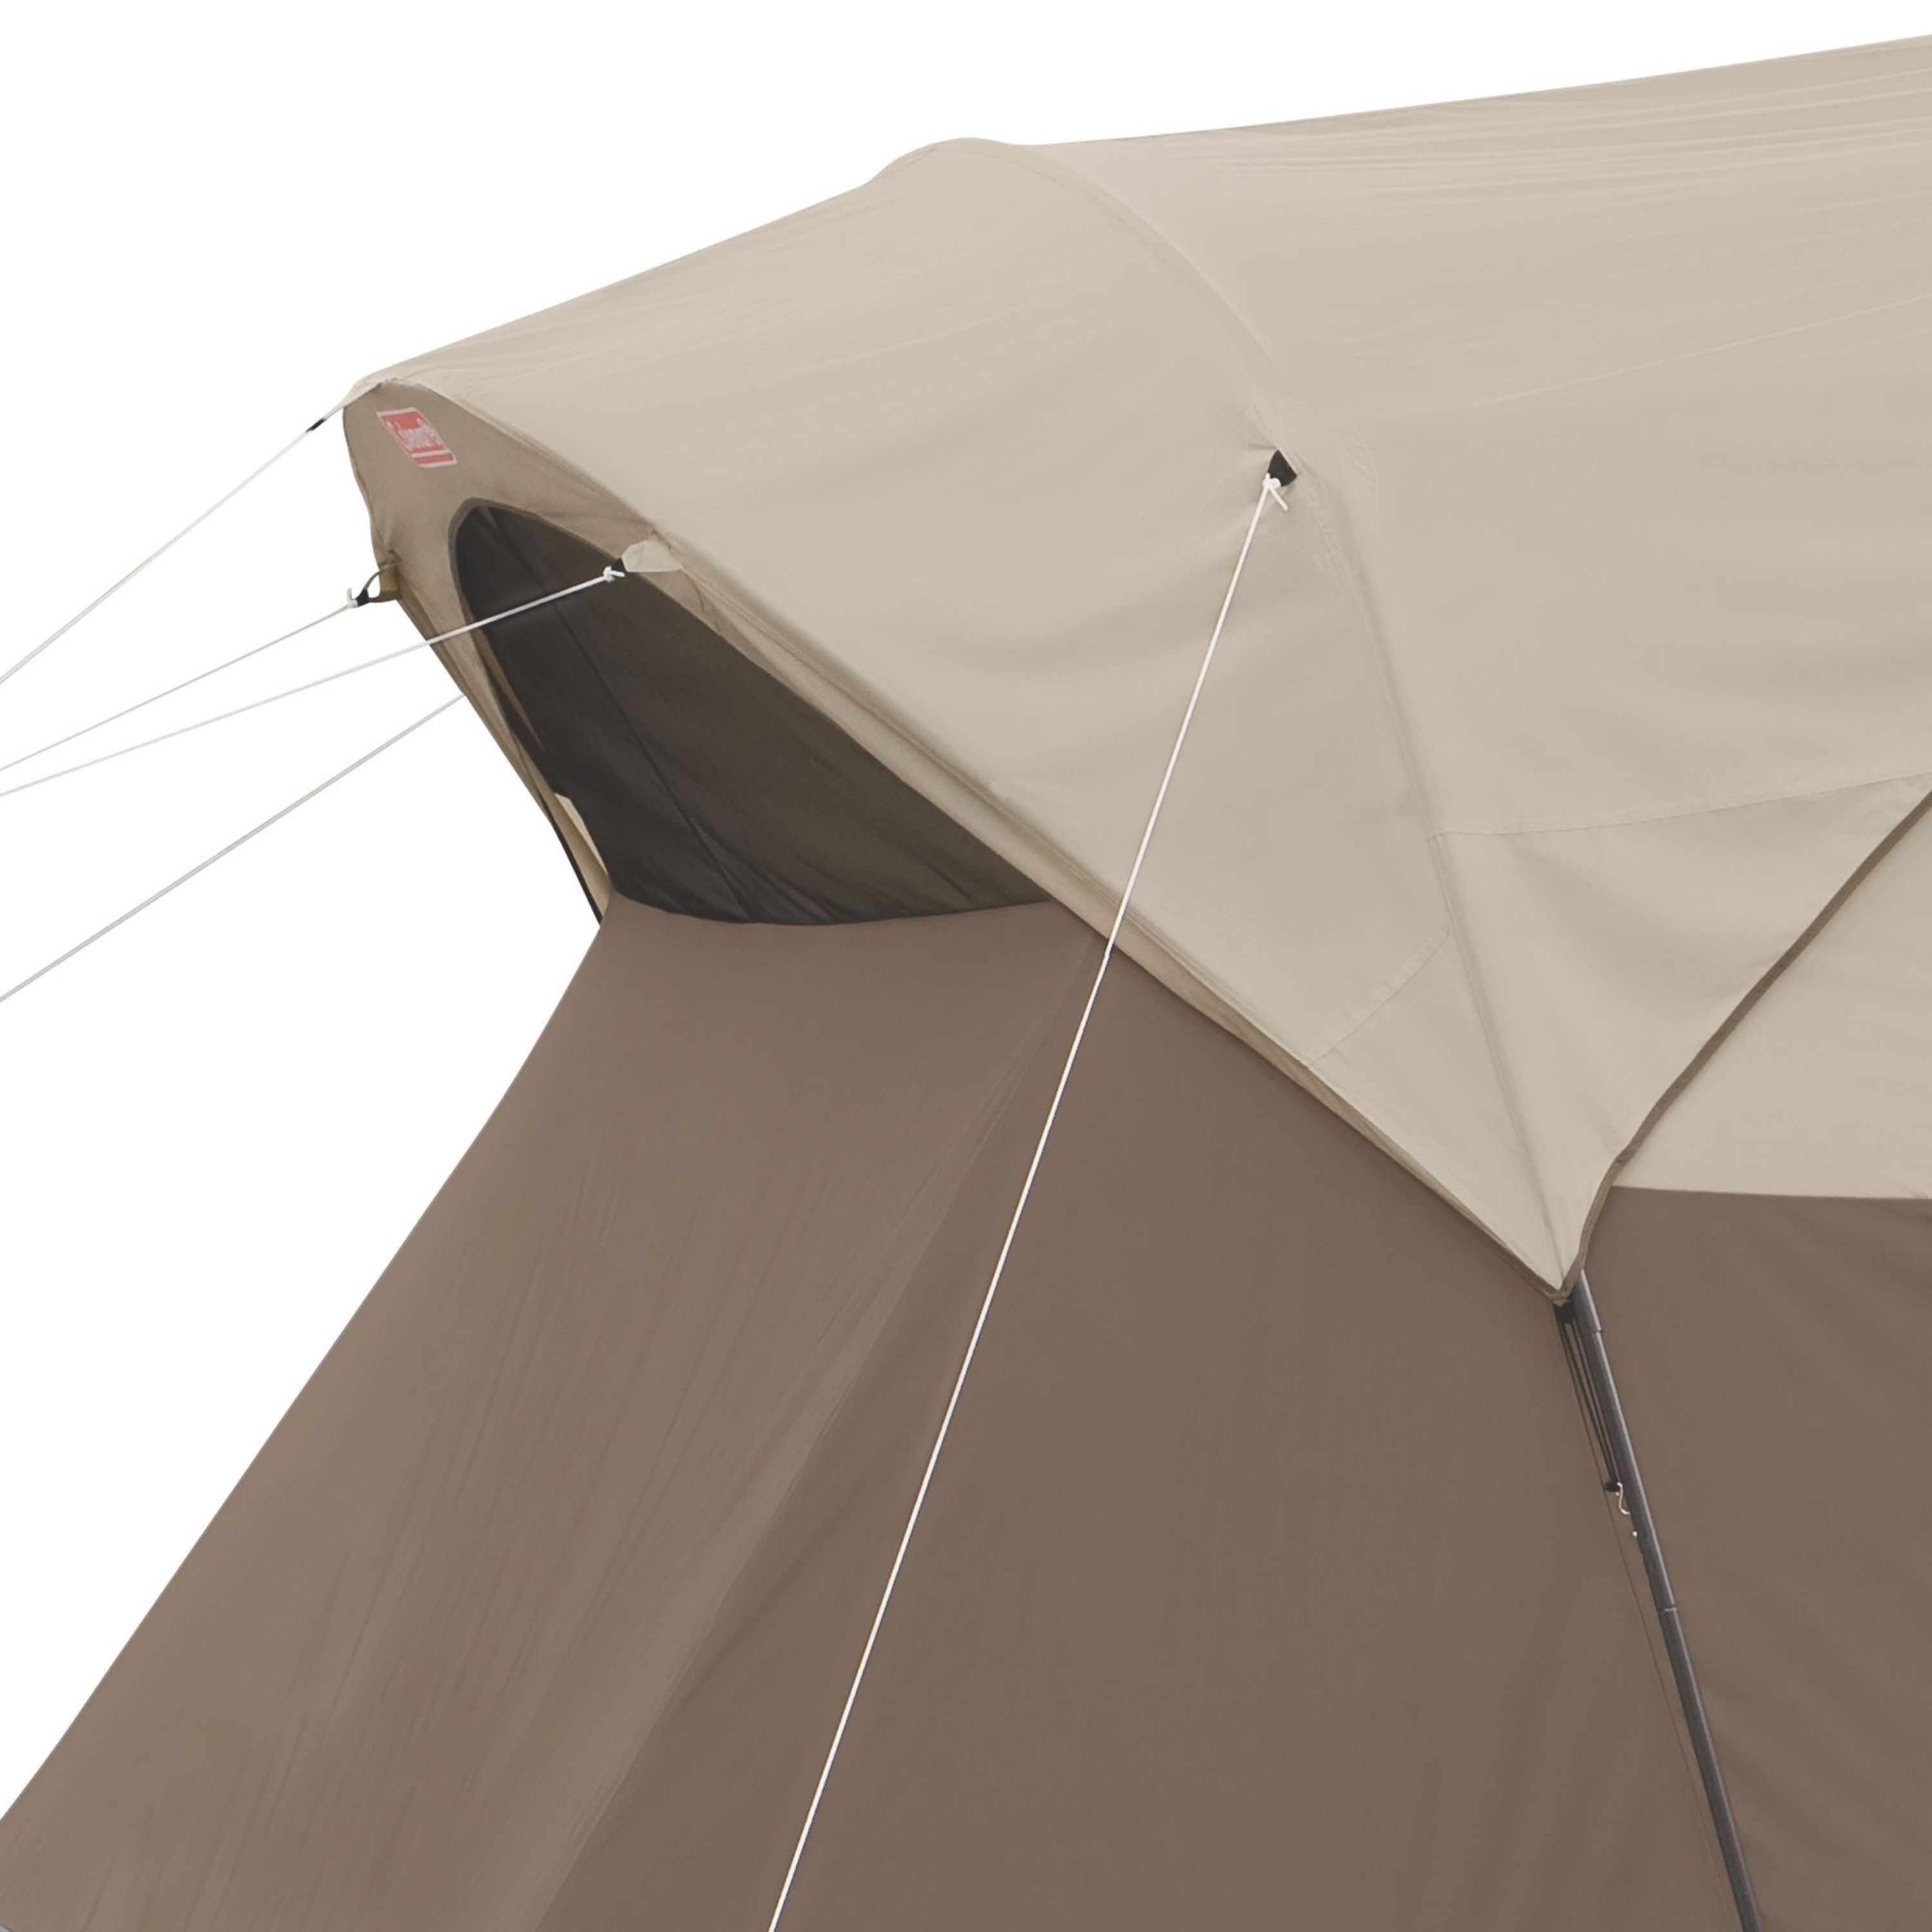 Coleman WeatherMaster 10 Person Tent with Room Divider - image 3 of 7